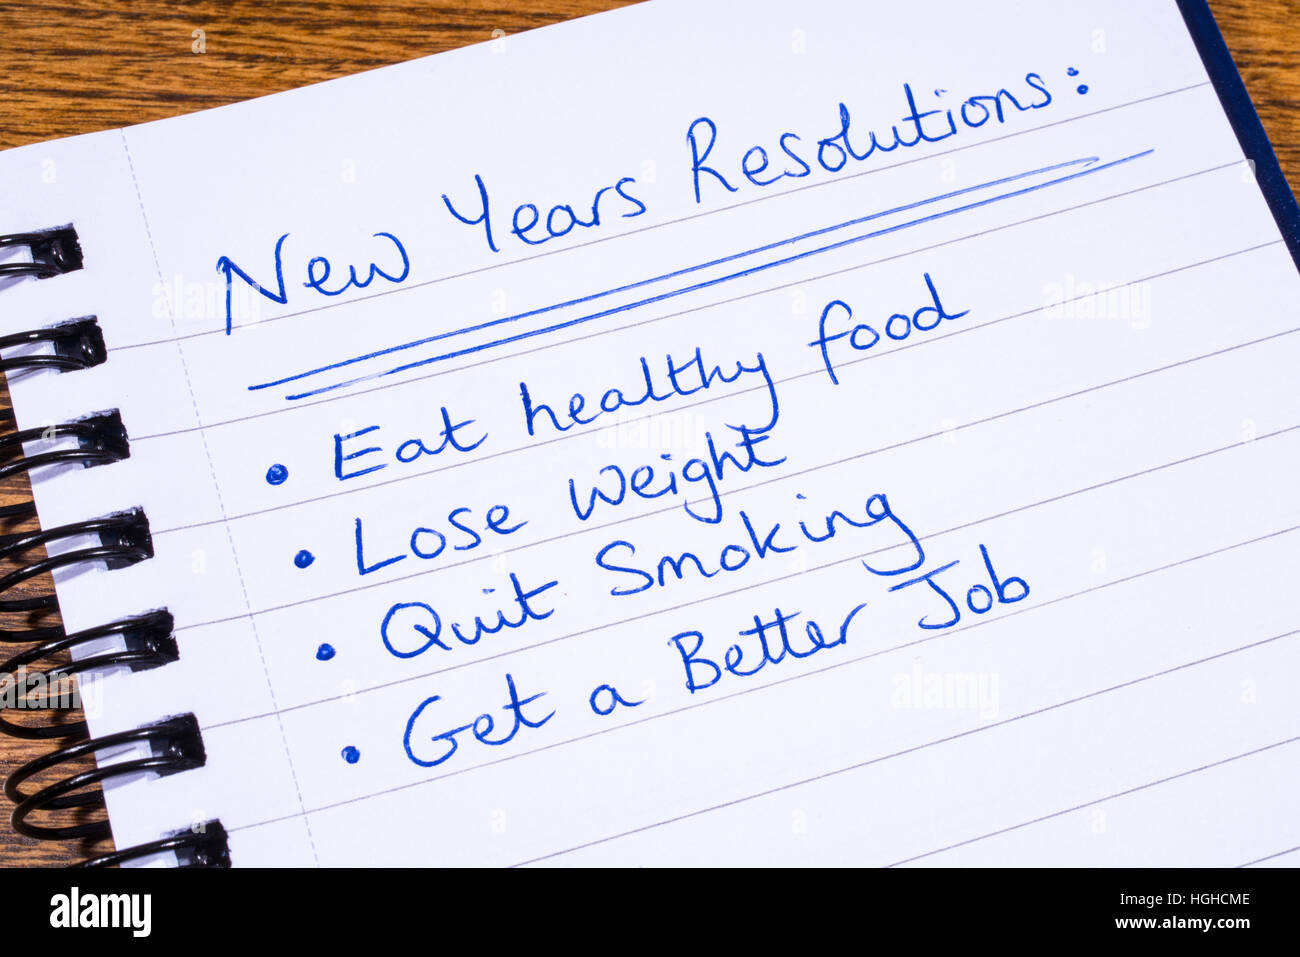 new years resolution writing paper